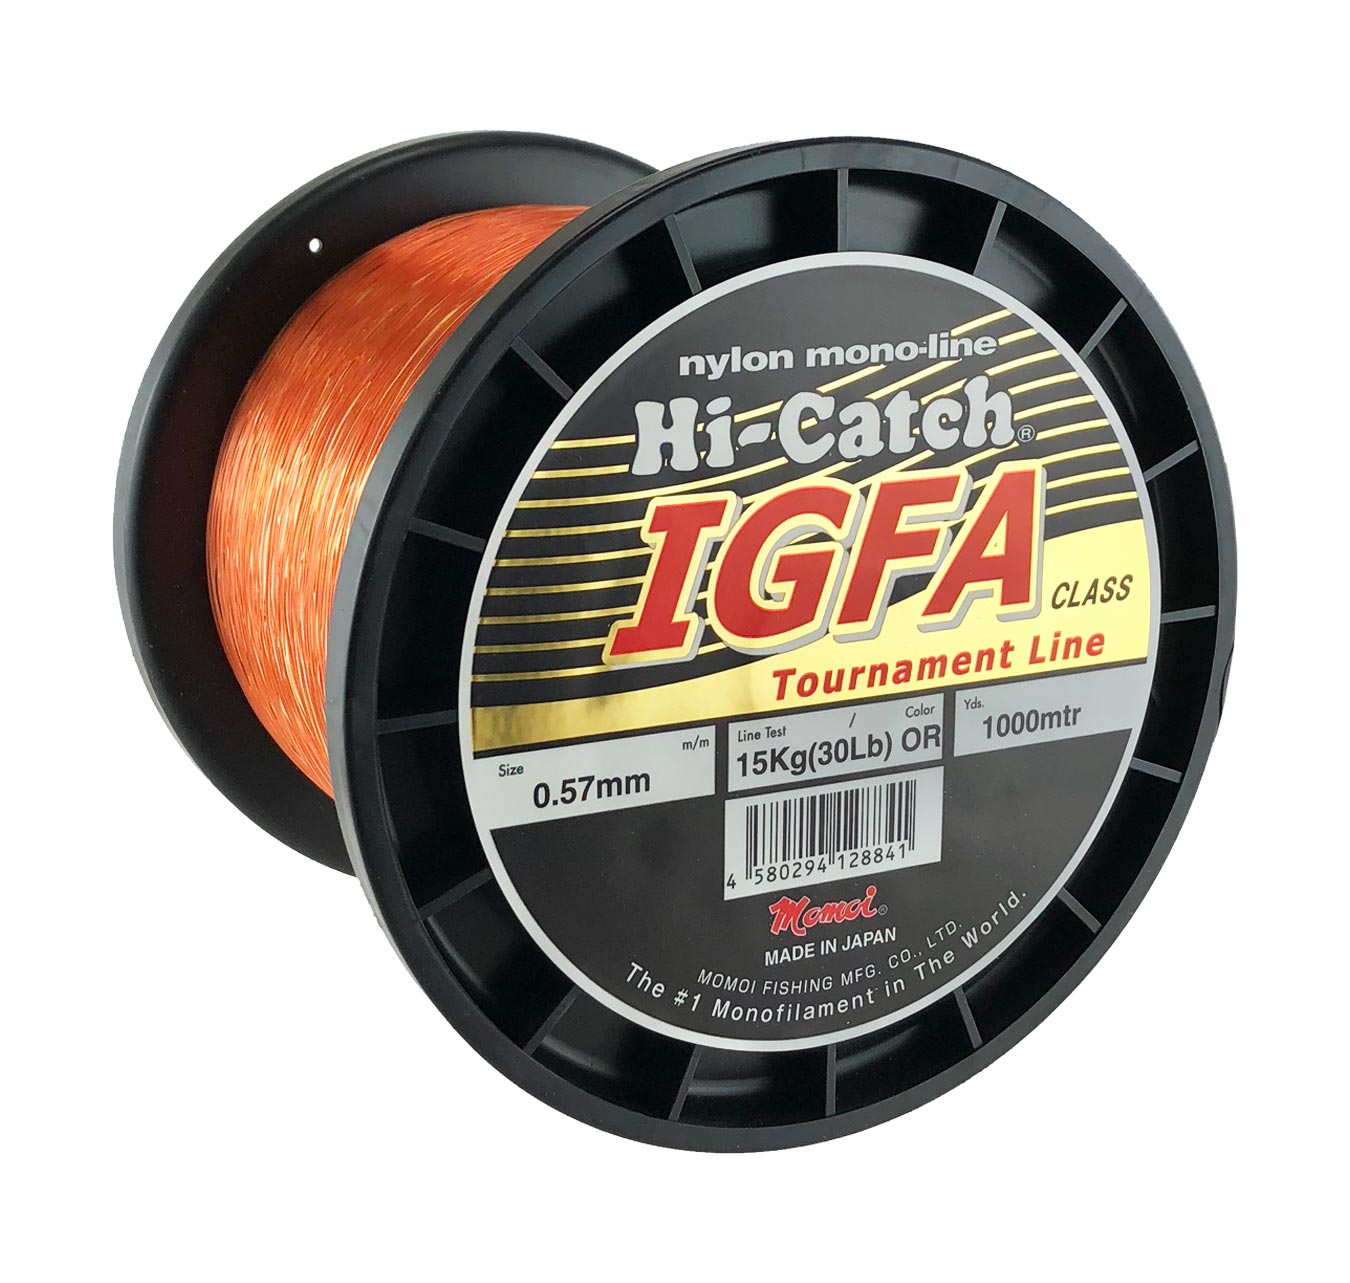 Line Testing with IGFA HQ - Momoi's Hi-Catch Diamond 100-lb Monofilament   Welcome back to Line Testing with IGFA HQ! Ever wonder how the IGFA tests  line samples for potential world record